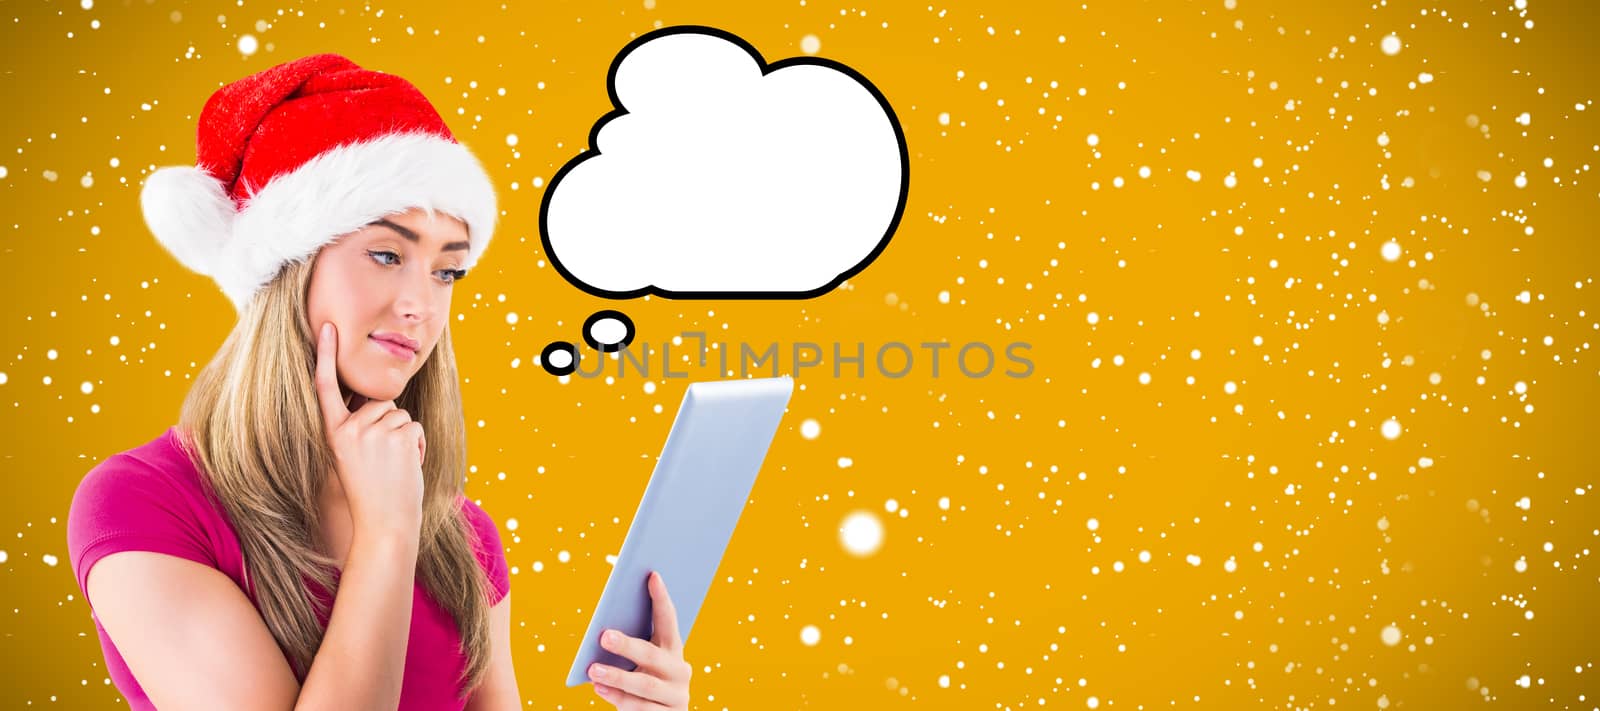 Festive blonde looking at tablet pc against yellow background with vignette